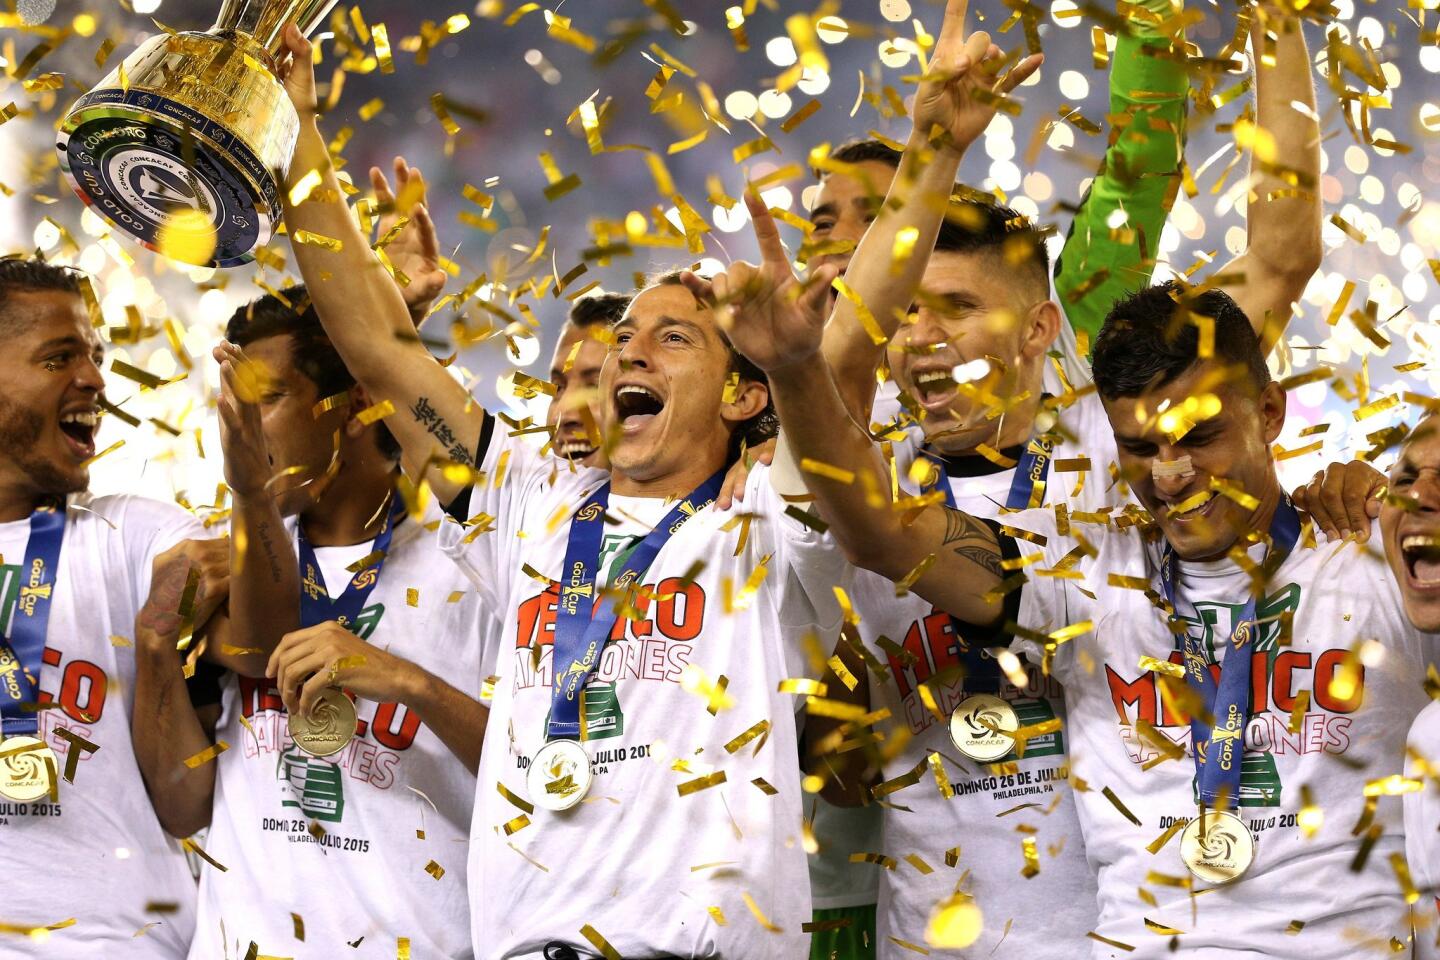 PHILADELPHIA, PA - JULY 26: Andres Guardado #18 of Mexico and teammates celebrate after defeating Jamaica in the CONCACAF Gold Cup Final at Lincoln Financial Field on July 26, 2015 in Philadelphia, Pennsylvania. Mexico won, 3-1. (Photo by Patrick Smith/Getty Images) ** OUTS - ELSENT, FPG - OUTS * NM, PH, VA if sourced by CT, LA or MoD **